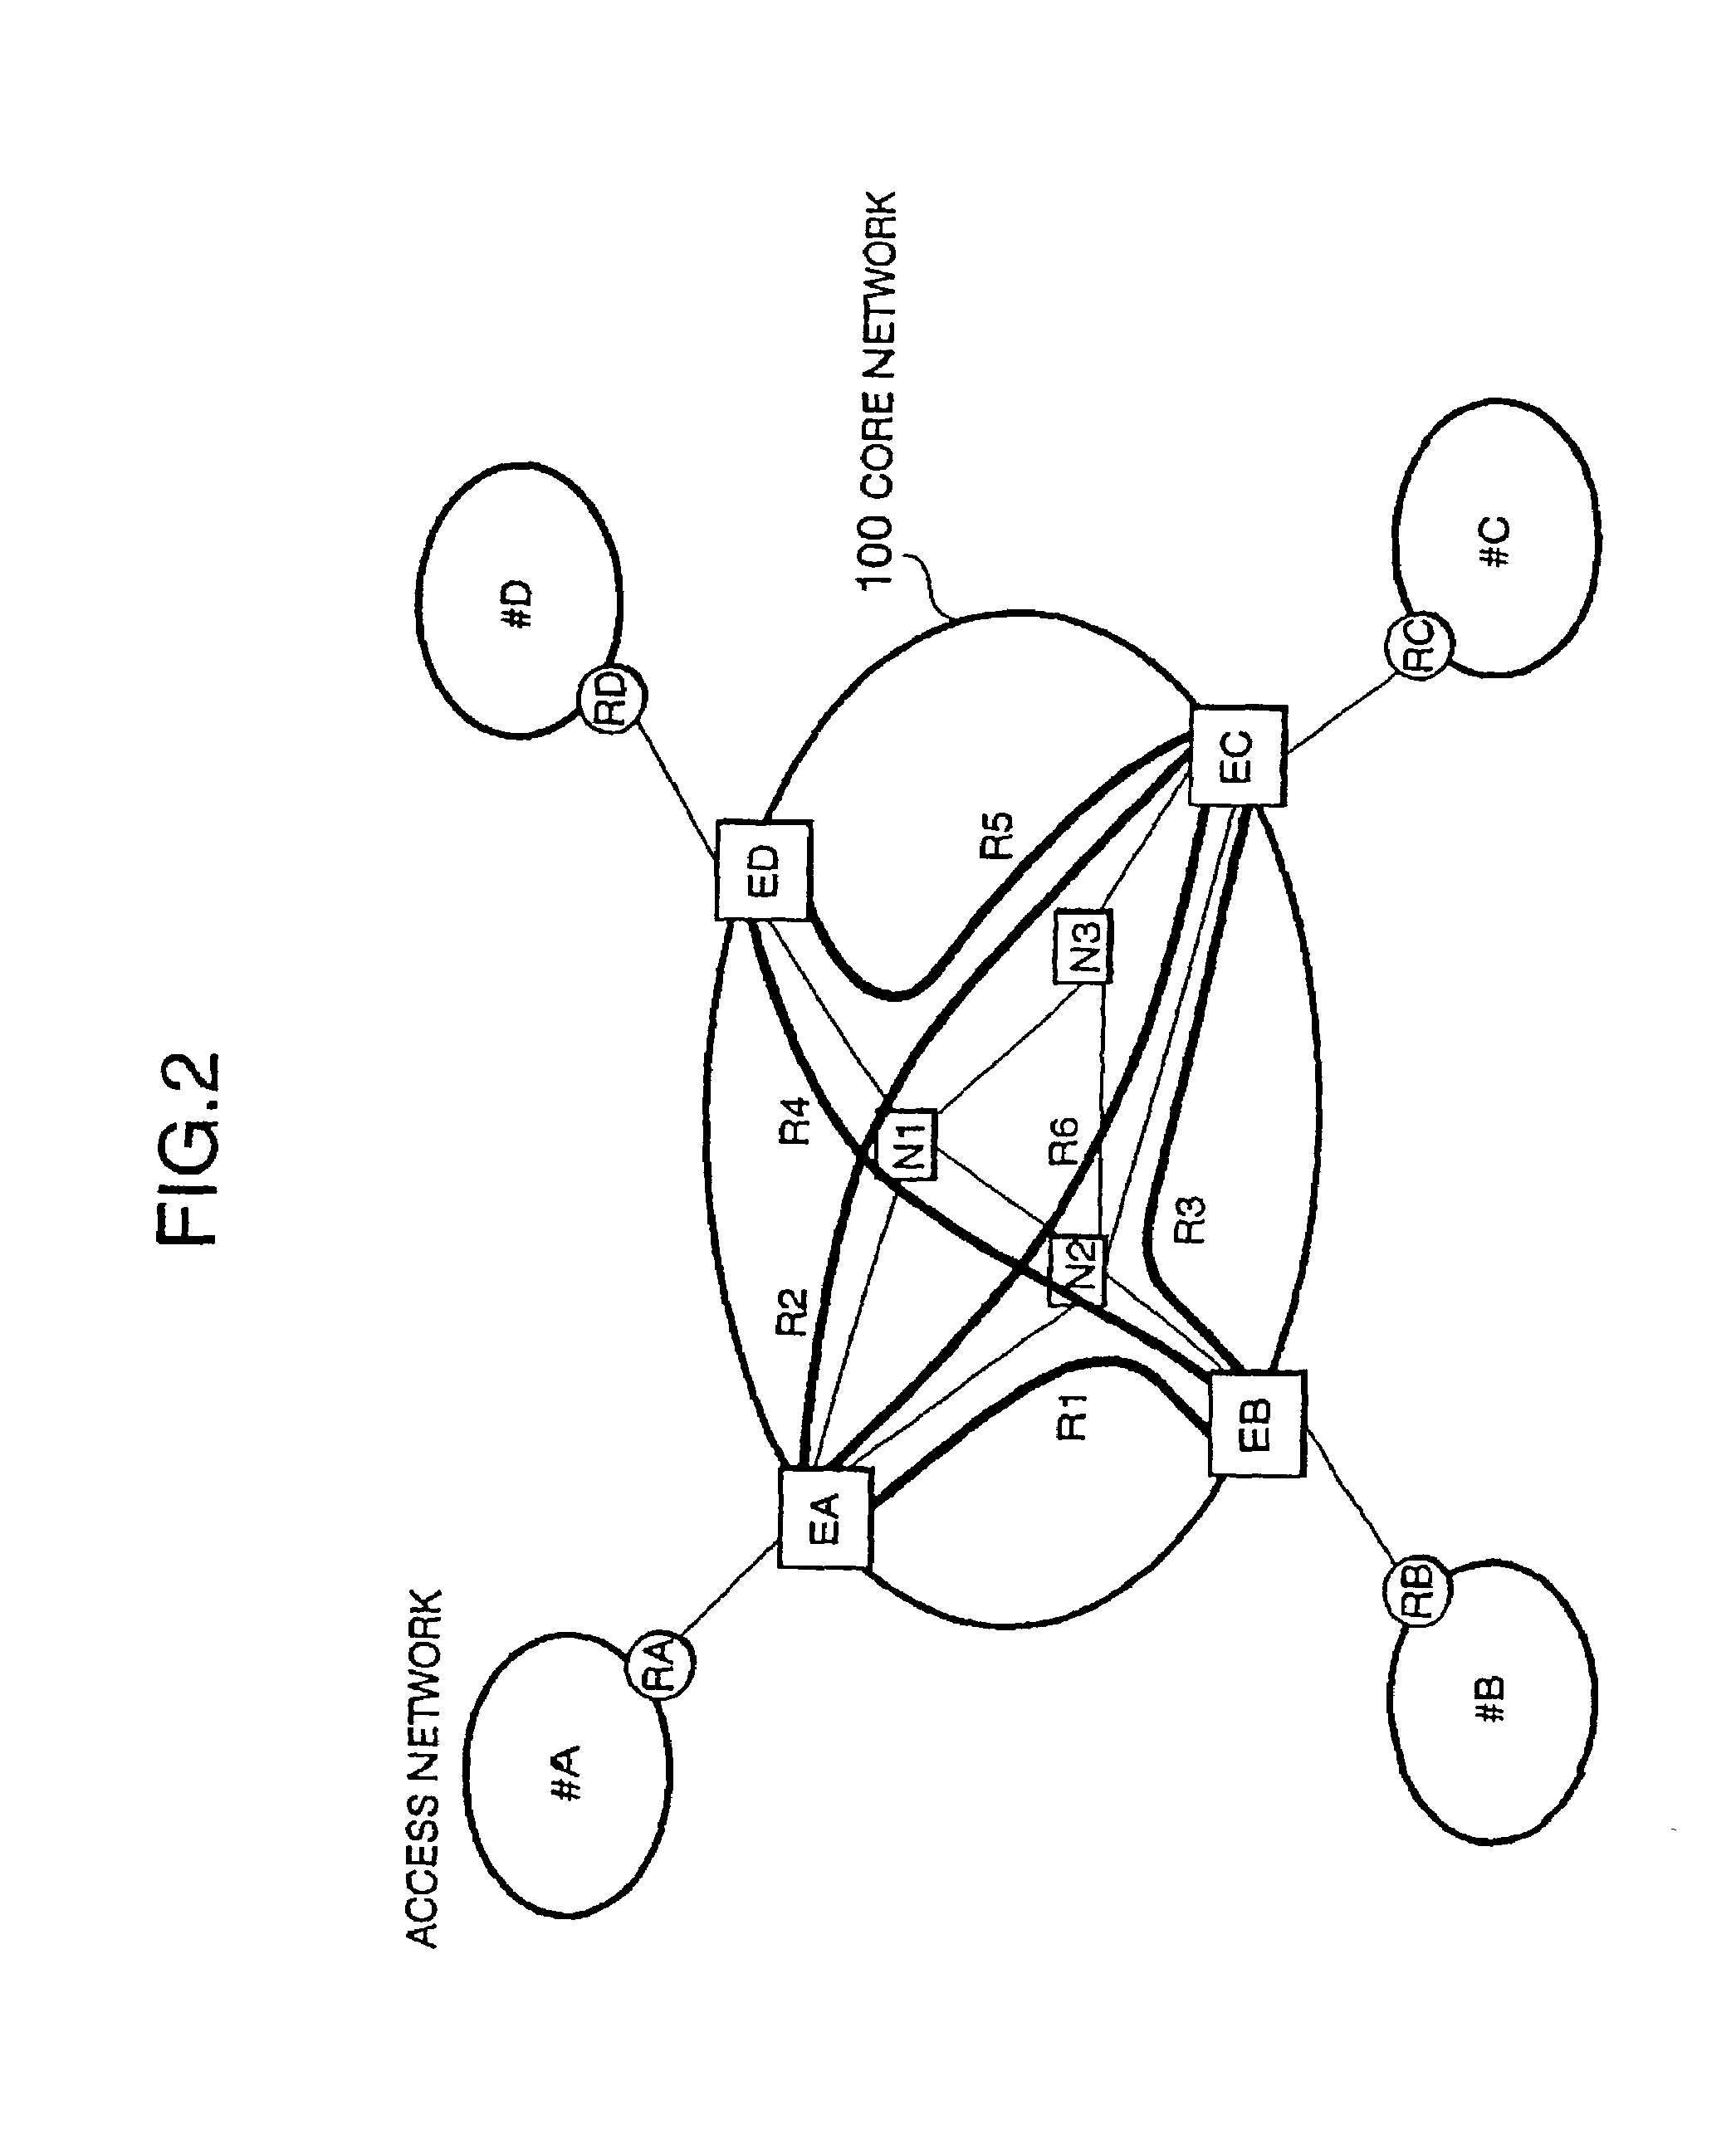 Packet switching network, packet switching equipment and network management equipment